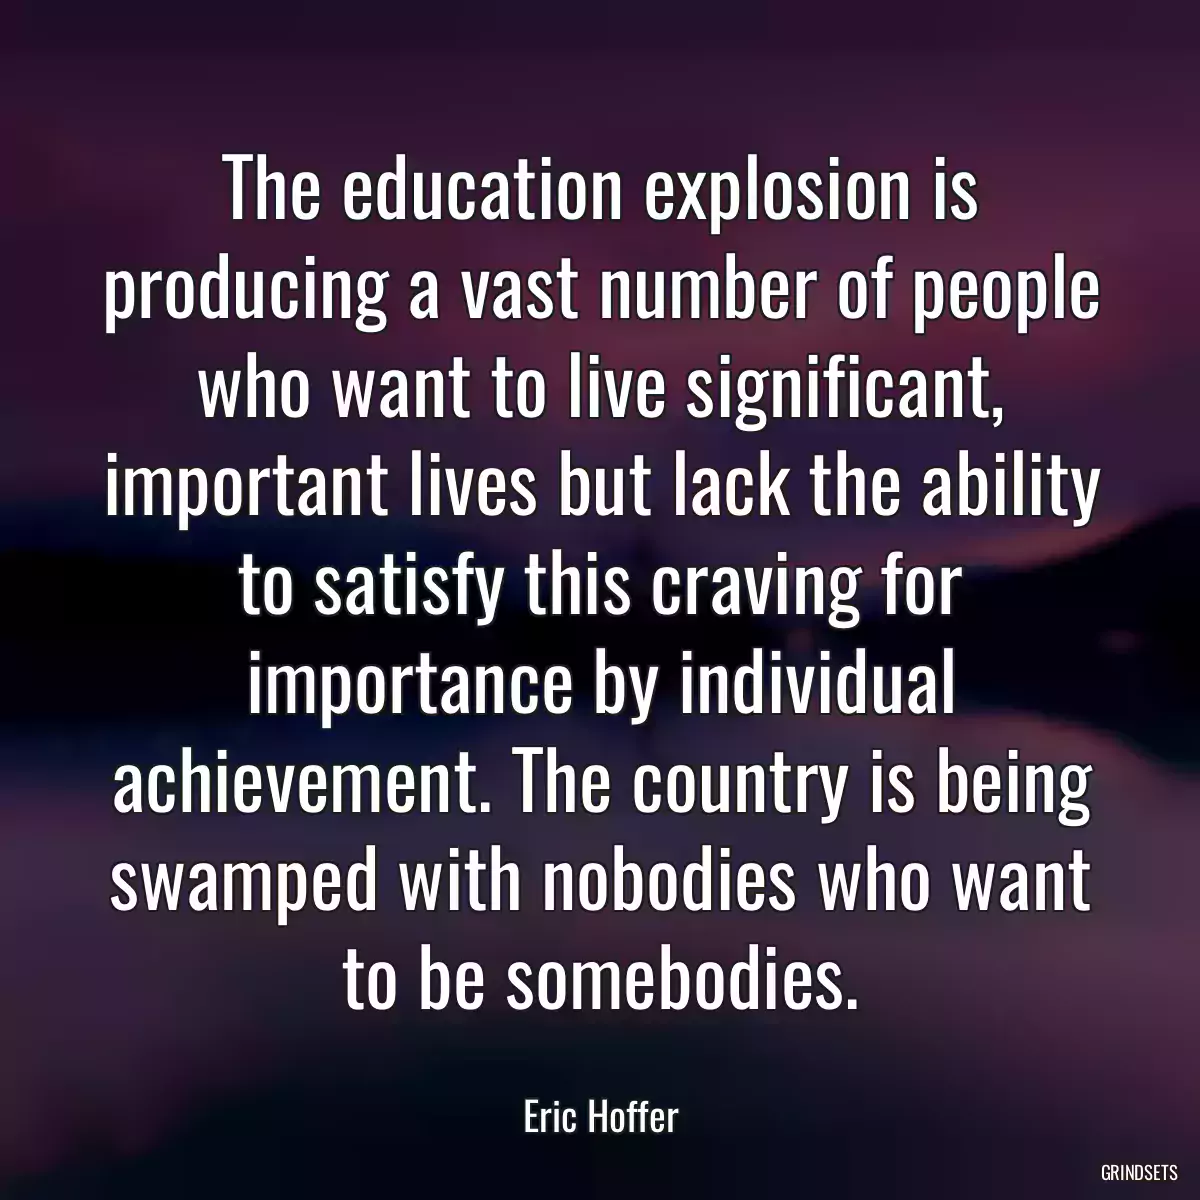 The education explosion is producing a vast number of people who want to live significant, important lives but lack the ability to satisfy this craving for importance by individual achievement. The country is being swamped with nobodies who want to be somebodies.